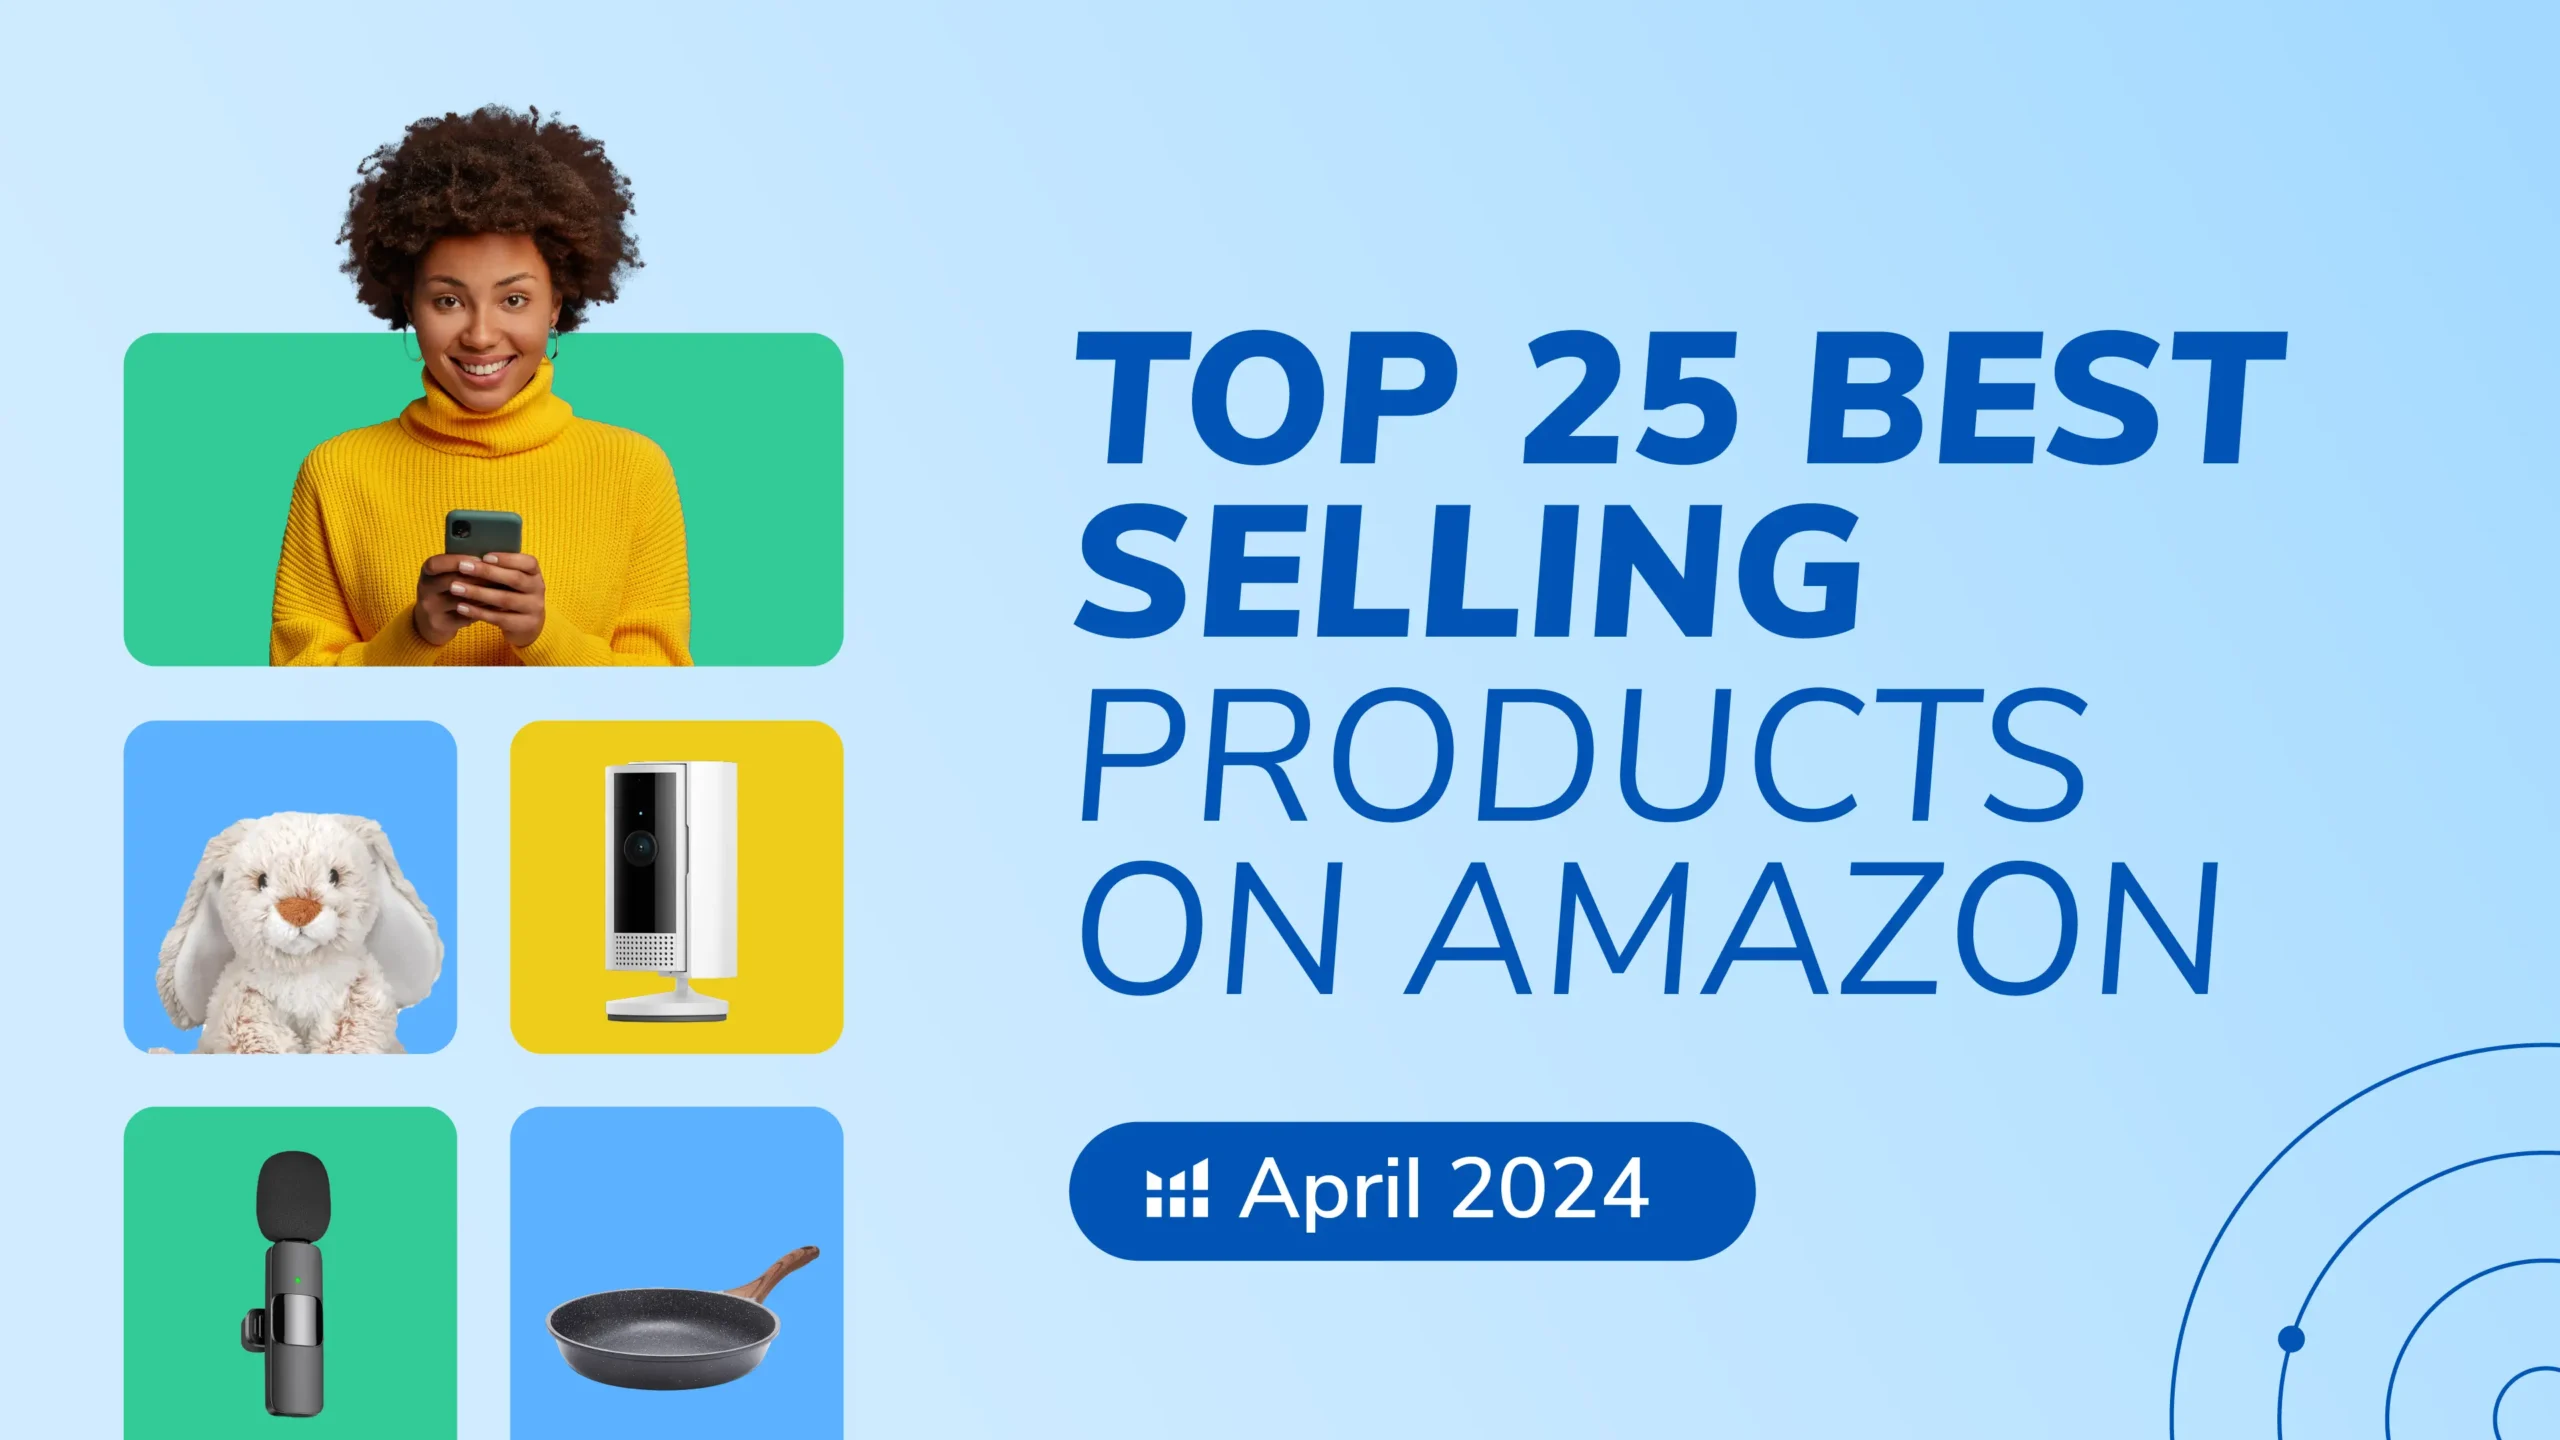 Top 25 Best Selling Products on Amazon in April 2024